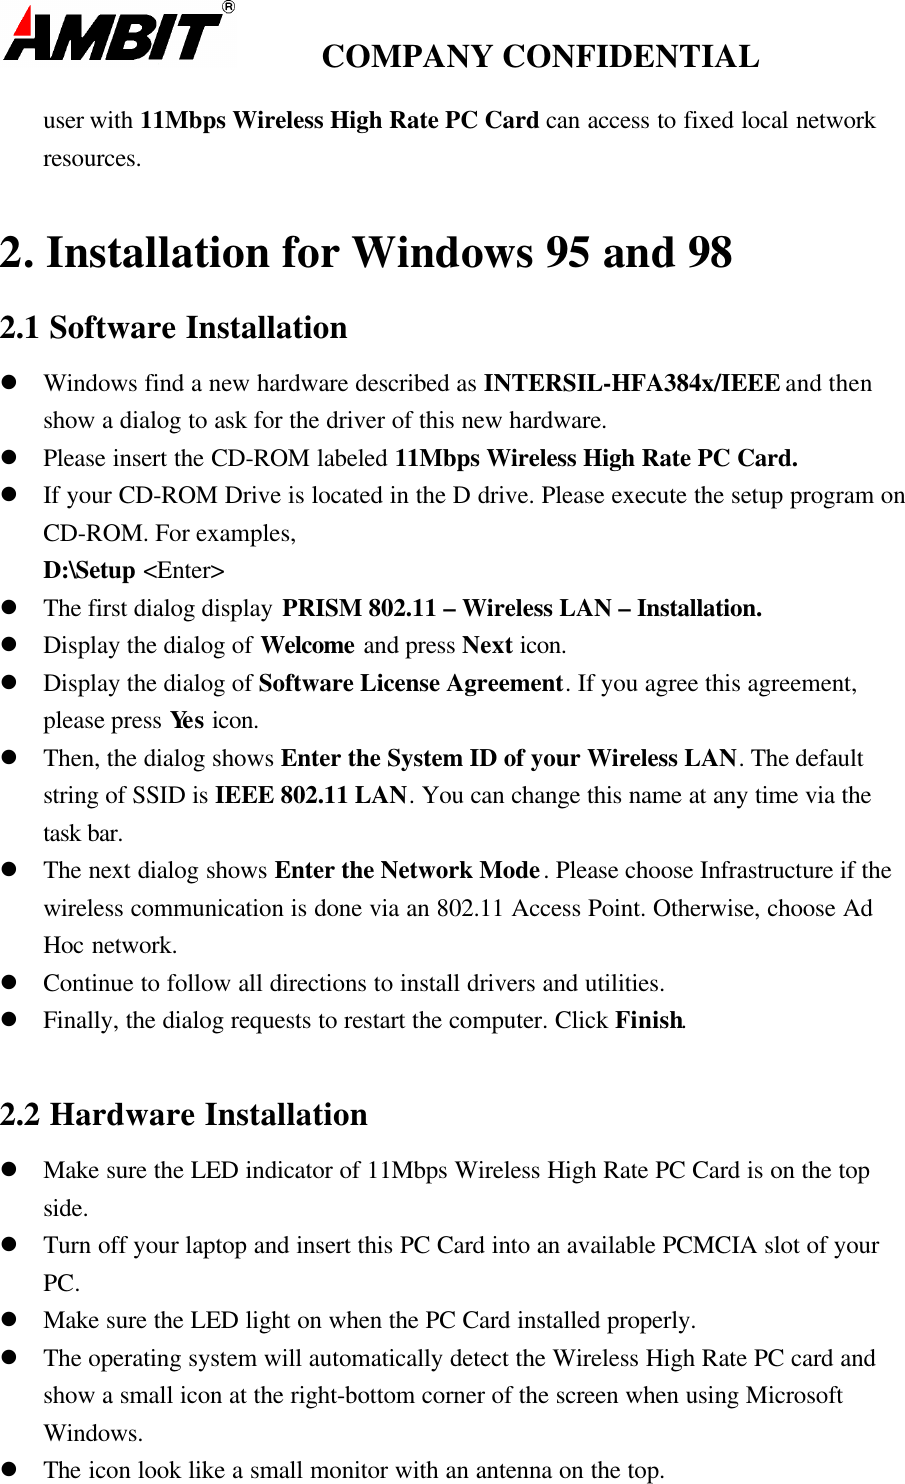         COMPANY CONFIDENTIALuser with 11Mbps Wireless High Rate PC Card can access to fixed local networkresources.2. Installation for Windows 95 and 982.1 Software Installationl Windows find a new hardware described as INTERSIL-HFA384x/IEEE and thenshow a dialog to ask for the driver of this new hardware.l Please insert the CD-ROM labeled 11Mbps Wireless High Rate PC Card.l If your CD-ROM Drive is located in the D drive. Please execute the setup program onCD-ROM. For examples,D:\Setup &lt;Enter&gt;l The first dialog display PRISM 802.11 – Wireless LAN – Installation.l Display the dialog of Welcome and press Next icon.l Display the dialog of Software License Agreement. If you agree this agreement,please press Yes icon.l Then, the dialog shows Enter the System ID of your Wireless LAN. The defaultstring of SSID is IEEE 802.11 LAN. You can change this name at any time via thetask bar.l The next dialog shows Enter the Network Mode. Please choose Infrastructure if thewireless communication is done via an 802.11 Access Point. Otherwise, choose AdHoc network.l Continue to follow all directions to install drivers and utilities.l Finally, the dialog requests to restart the computer. Click Finish.2.2 Hardware Installationl Make sure the LED indicator of 11Mbps Wireless High Rate PC Card is on the topside.l Turn off your laptop and insert this PC Card into an available PCMCIA slot of yourPC.l Make sure the LED light on when the PC Card installed properly.l The operating system will automatically detect the Wireless High Rate PC card andshow a small icon at the right-bottom corner of the screen when using MicrosoftWindows.l The icon look like a small monitor with an antenna on the top.